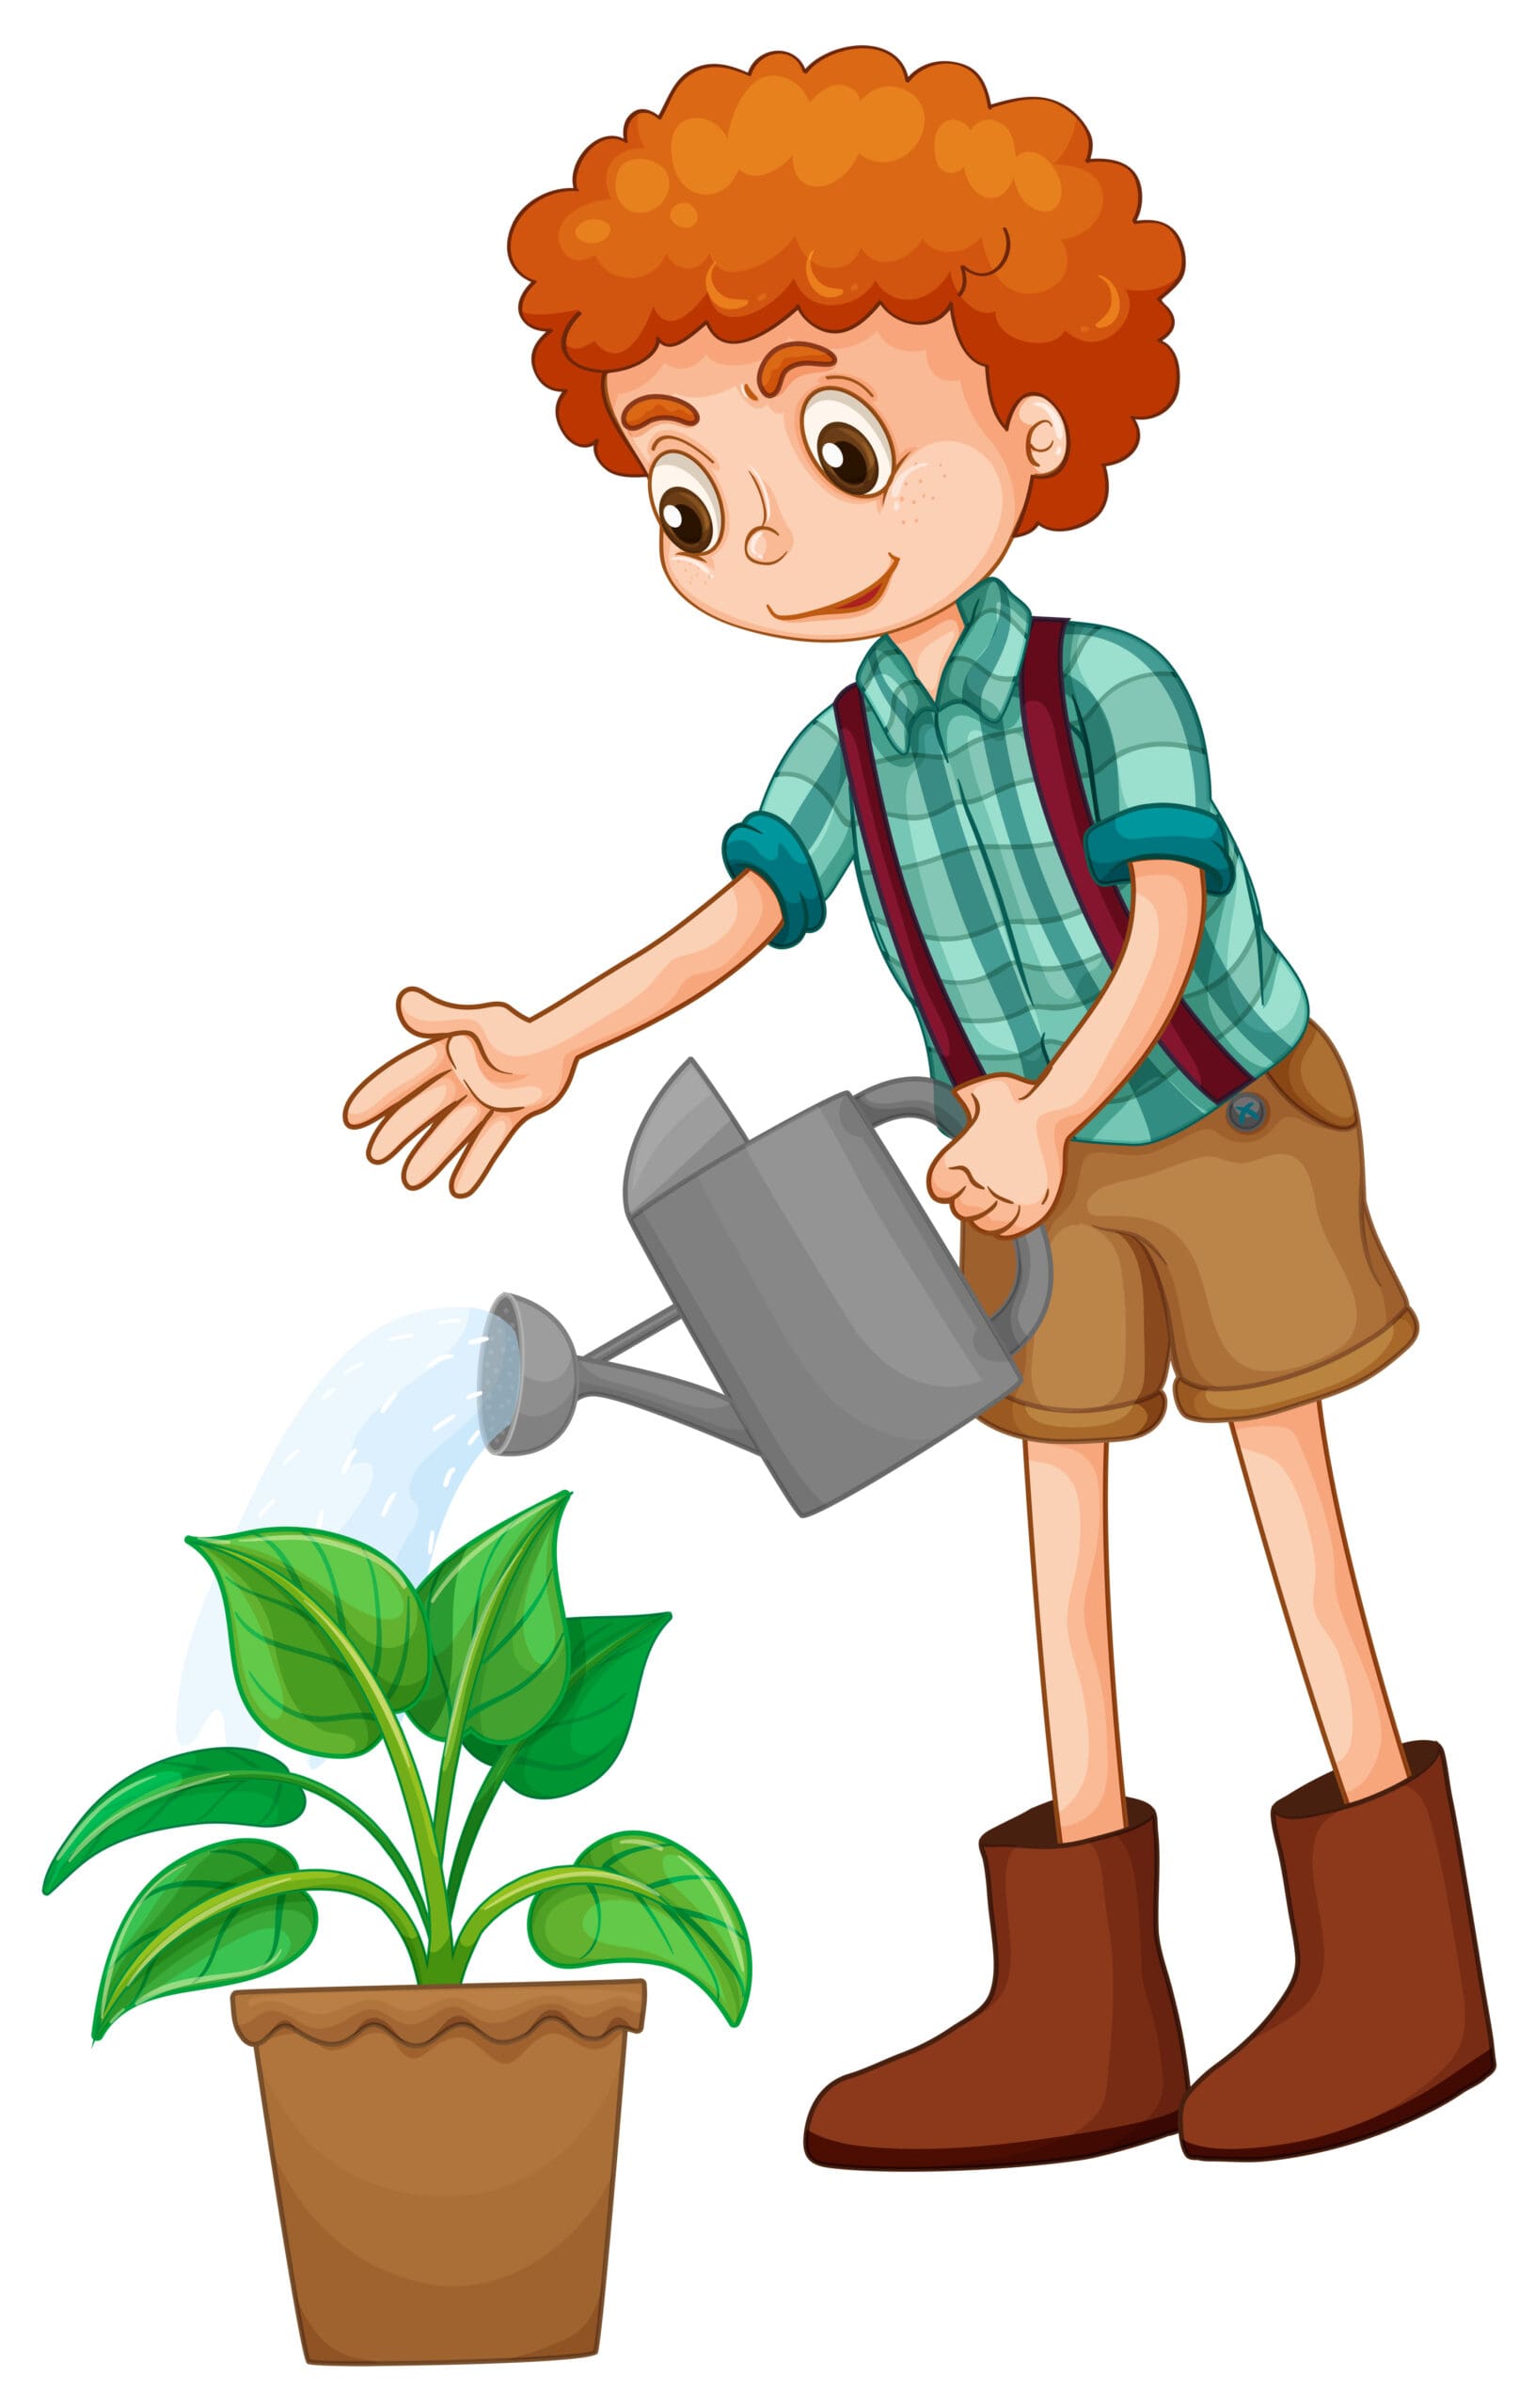 Boy watering the plant